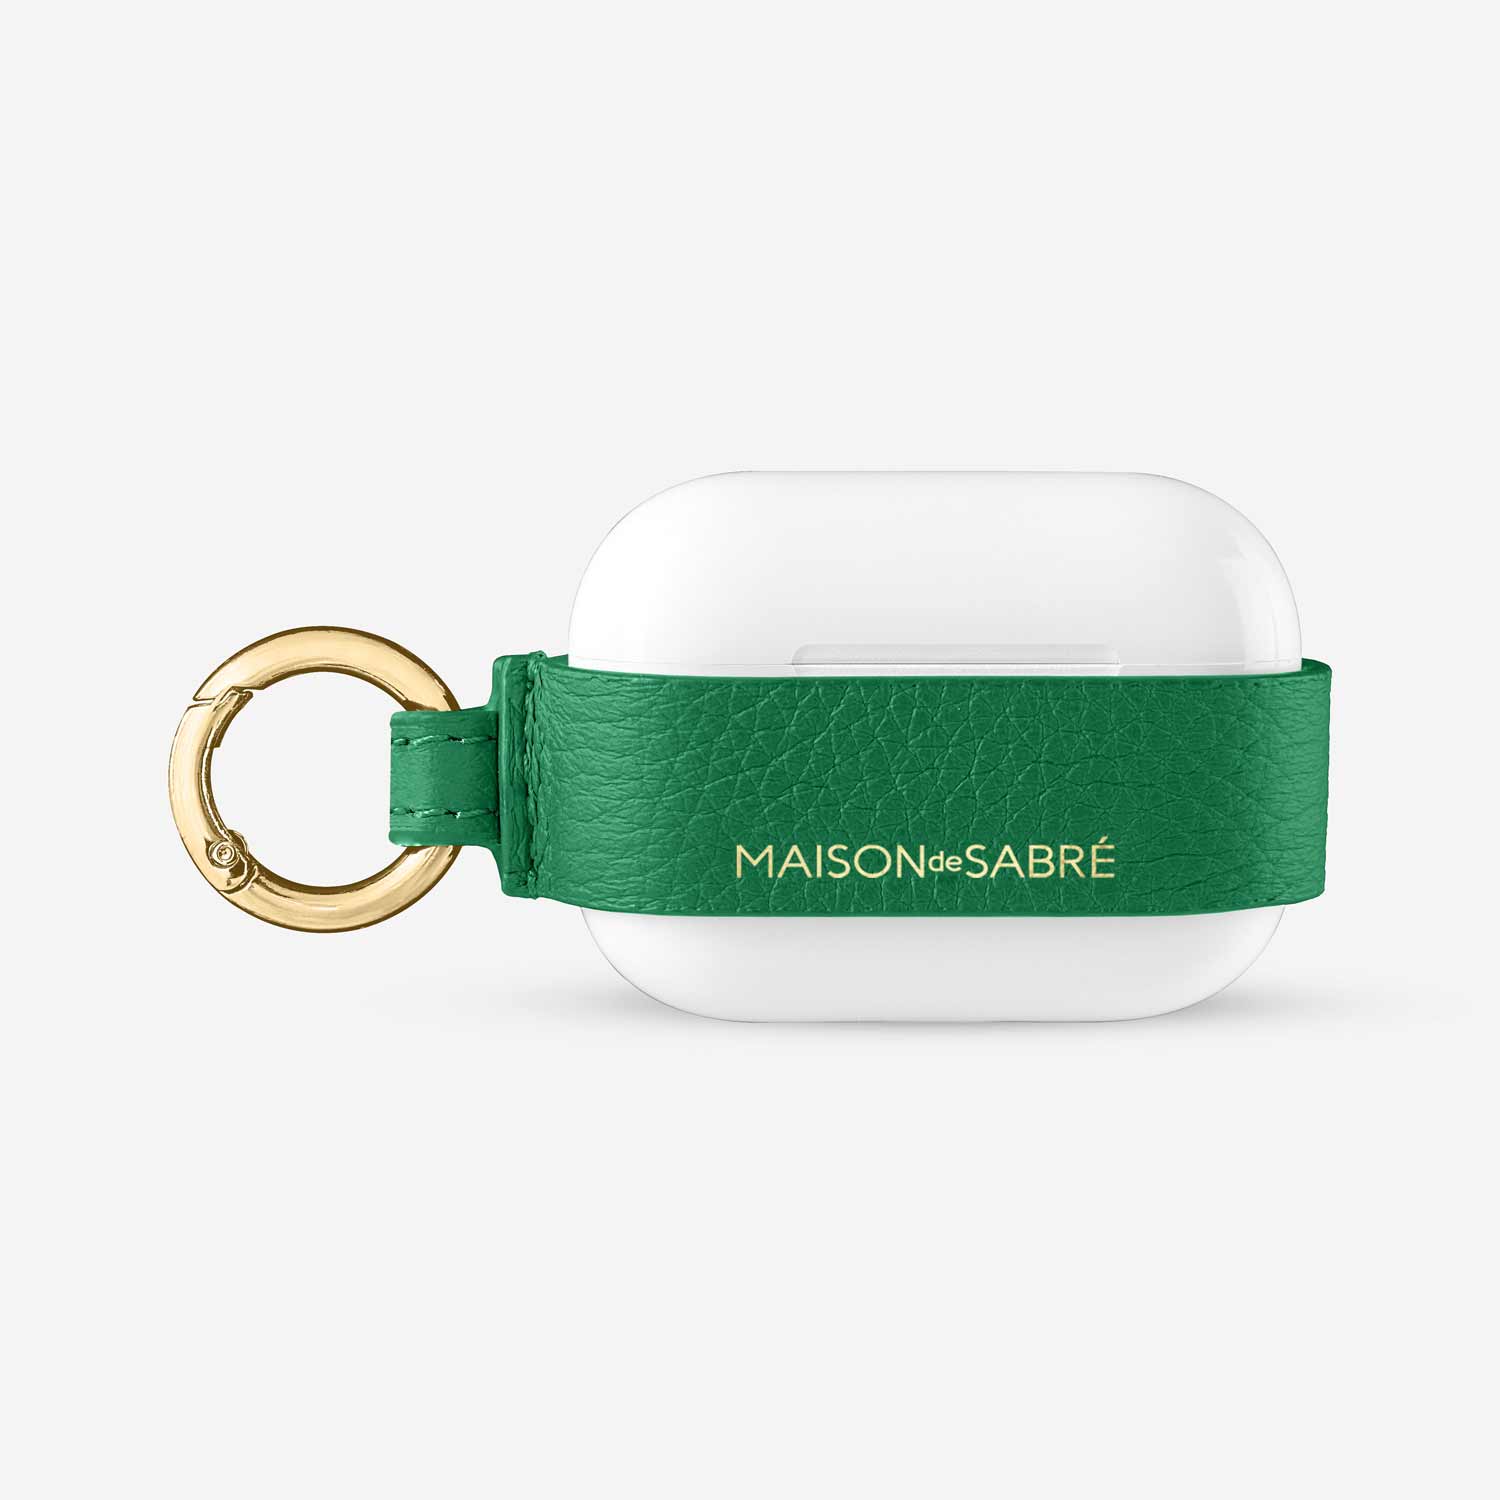 The AirPods Pro Belt